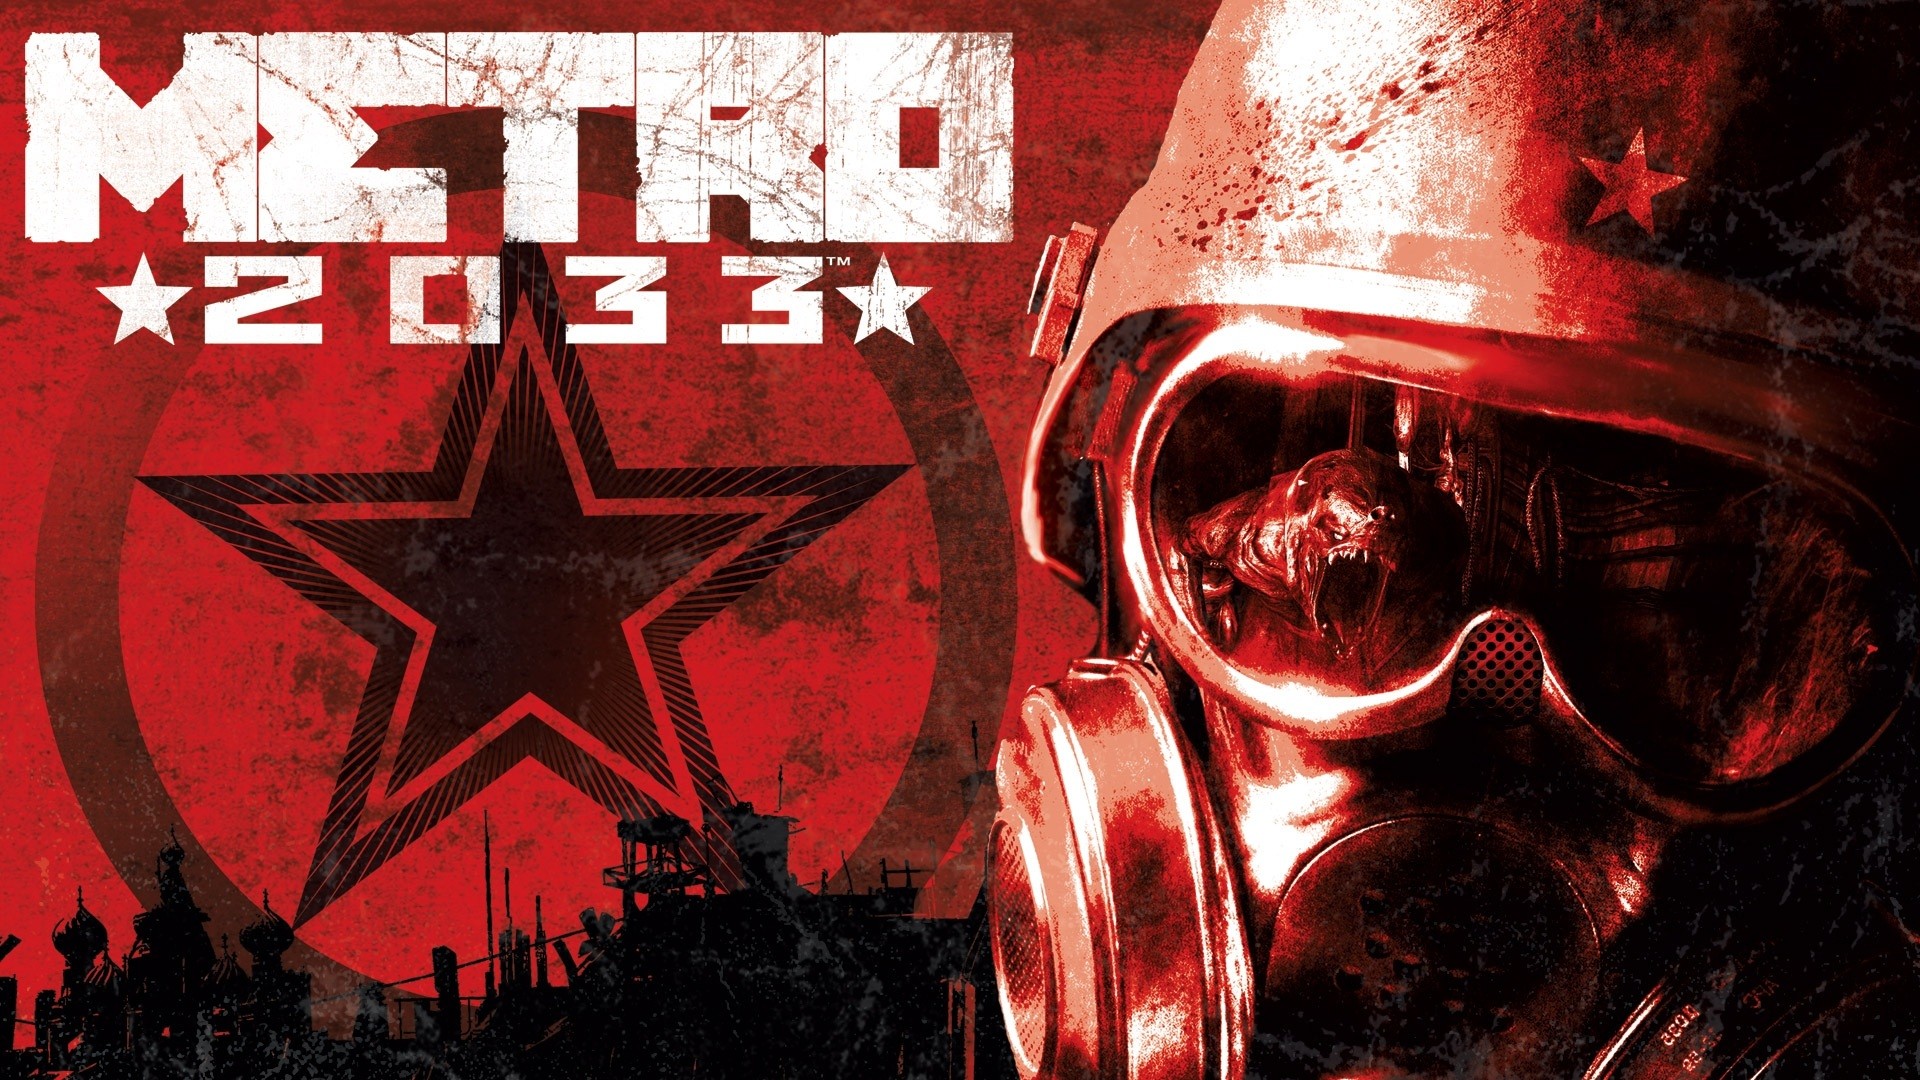 General 1920x1080 Metro 2033 video games video game art PC gaming apocalyptic